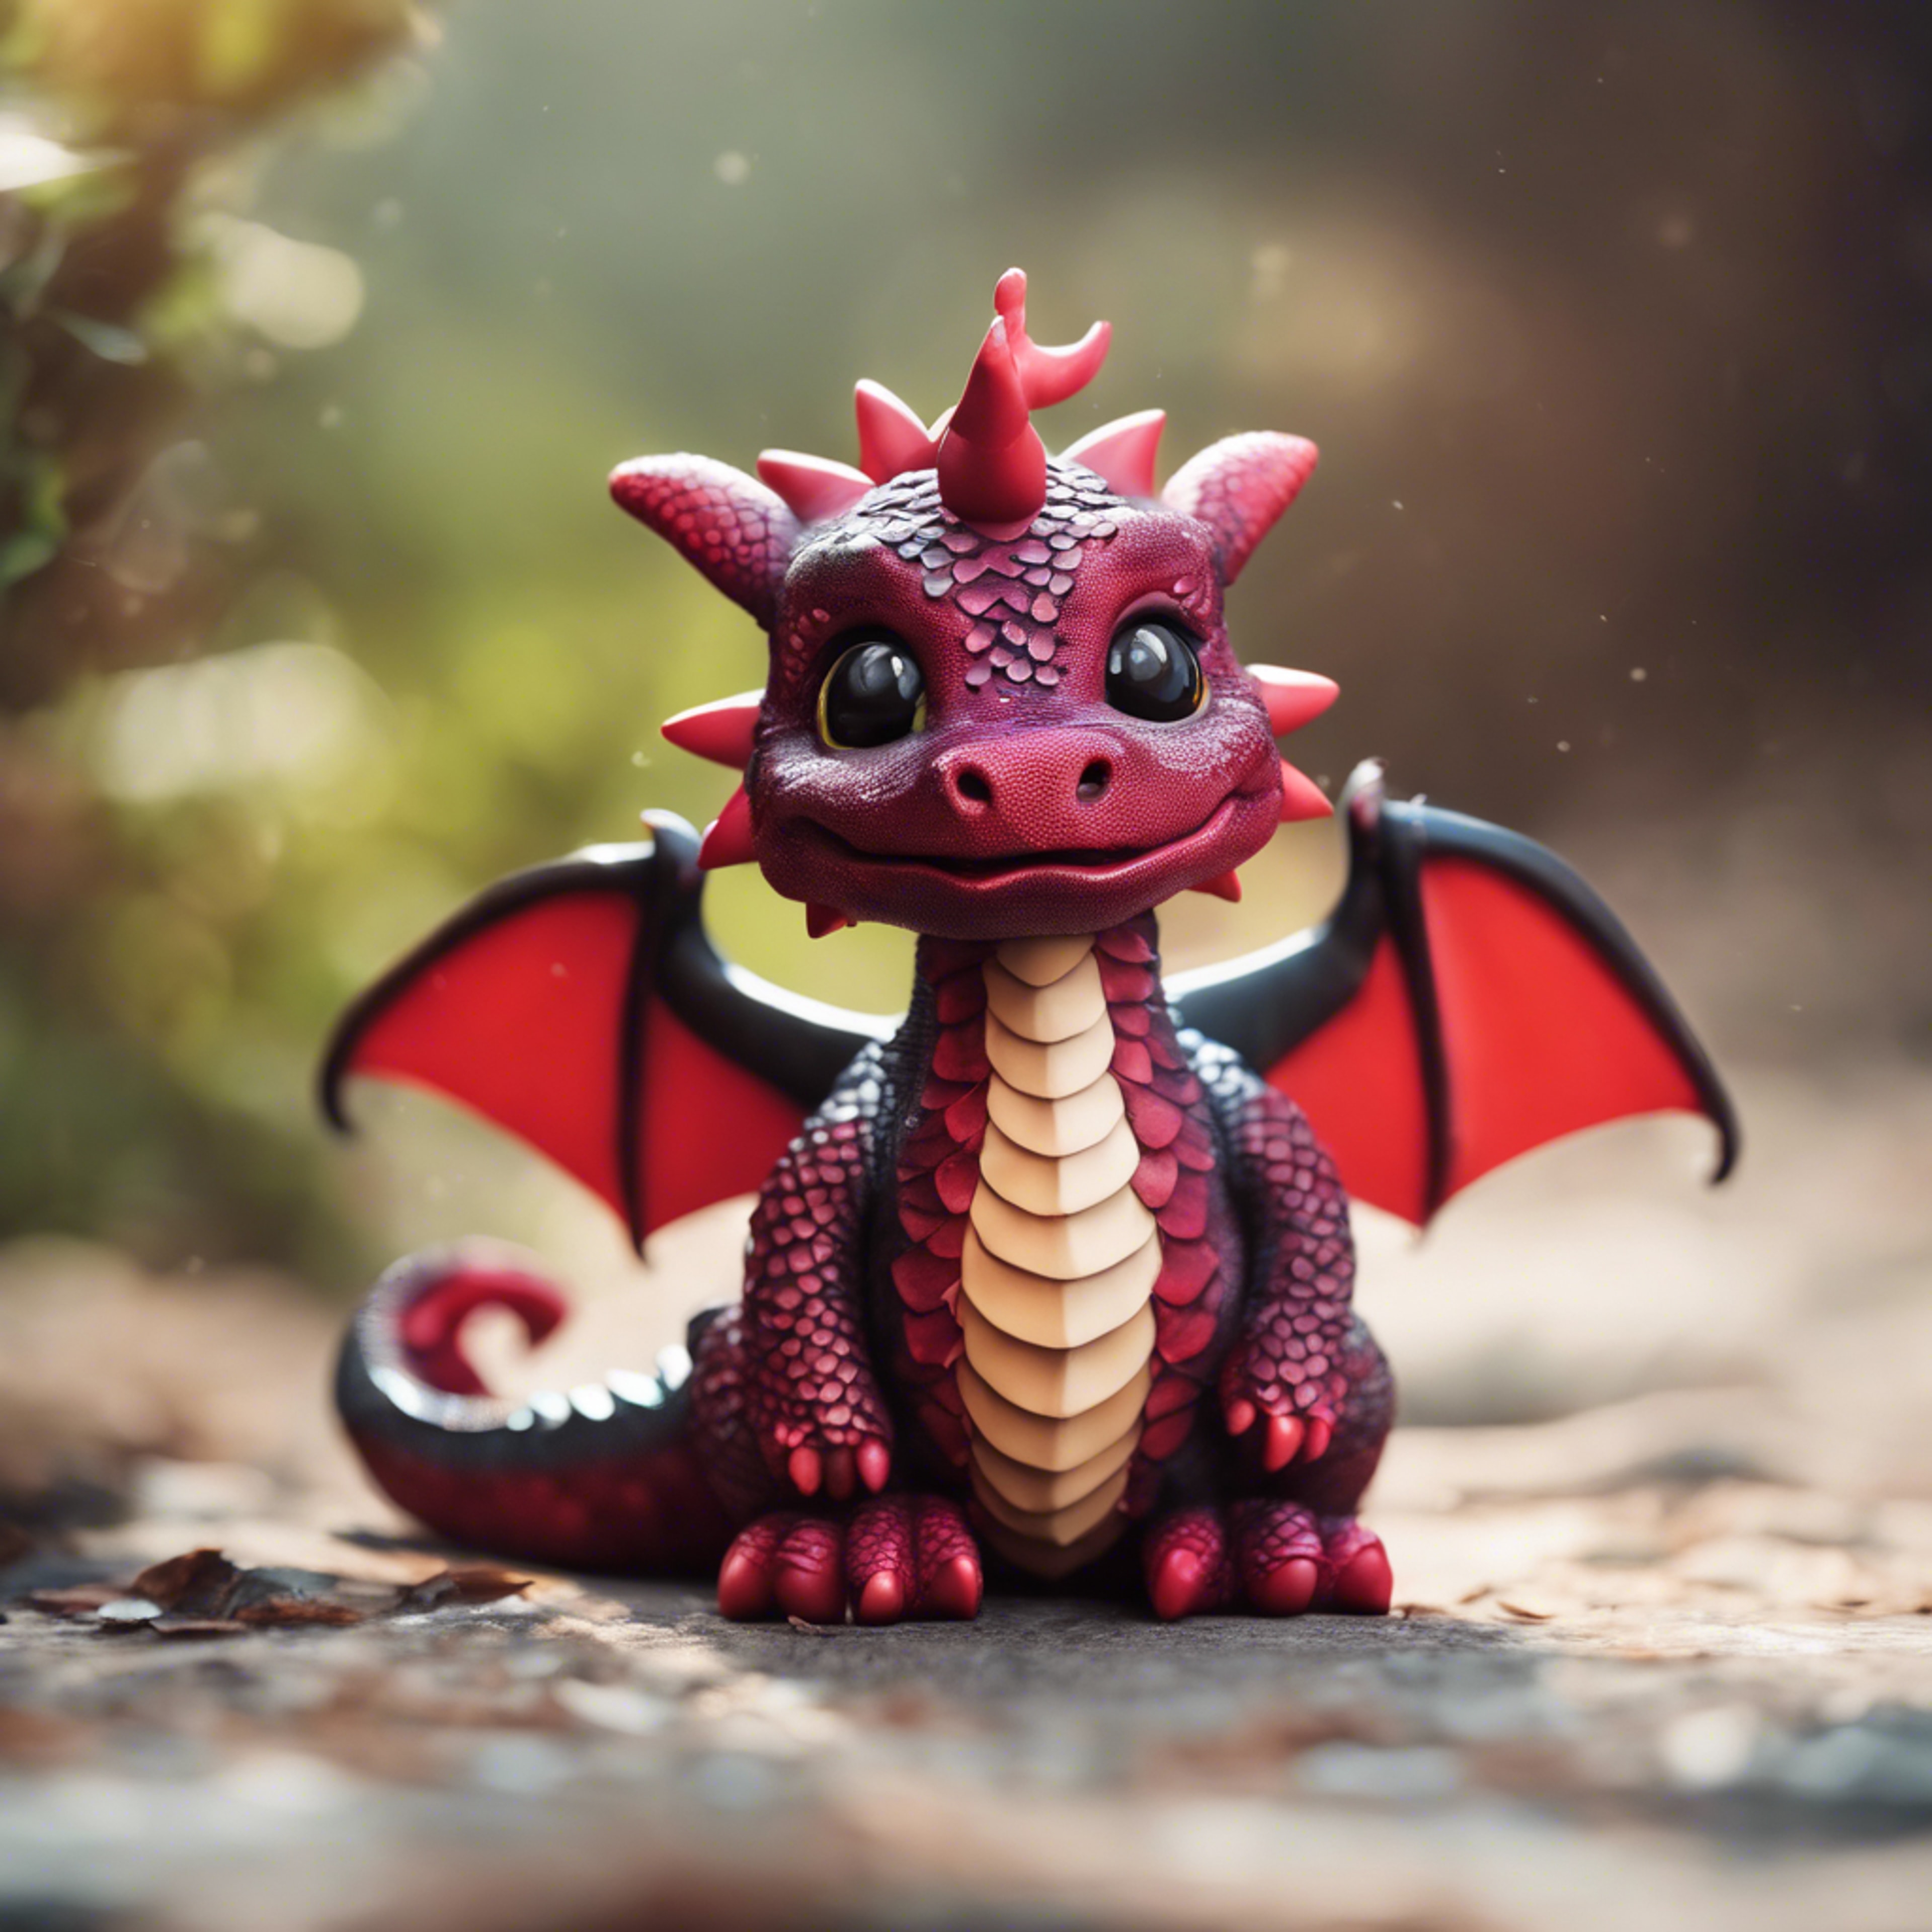 An adorable kawaii dragon, with bright red scales, curling its tail. Wallpaper[aecc183dac1a46b6a2a5]